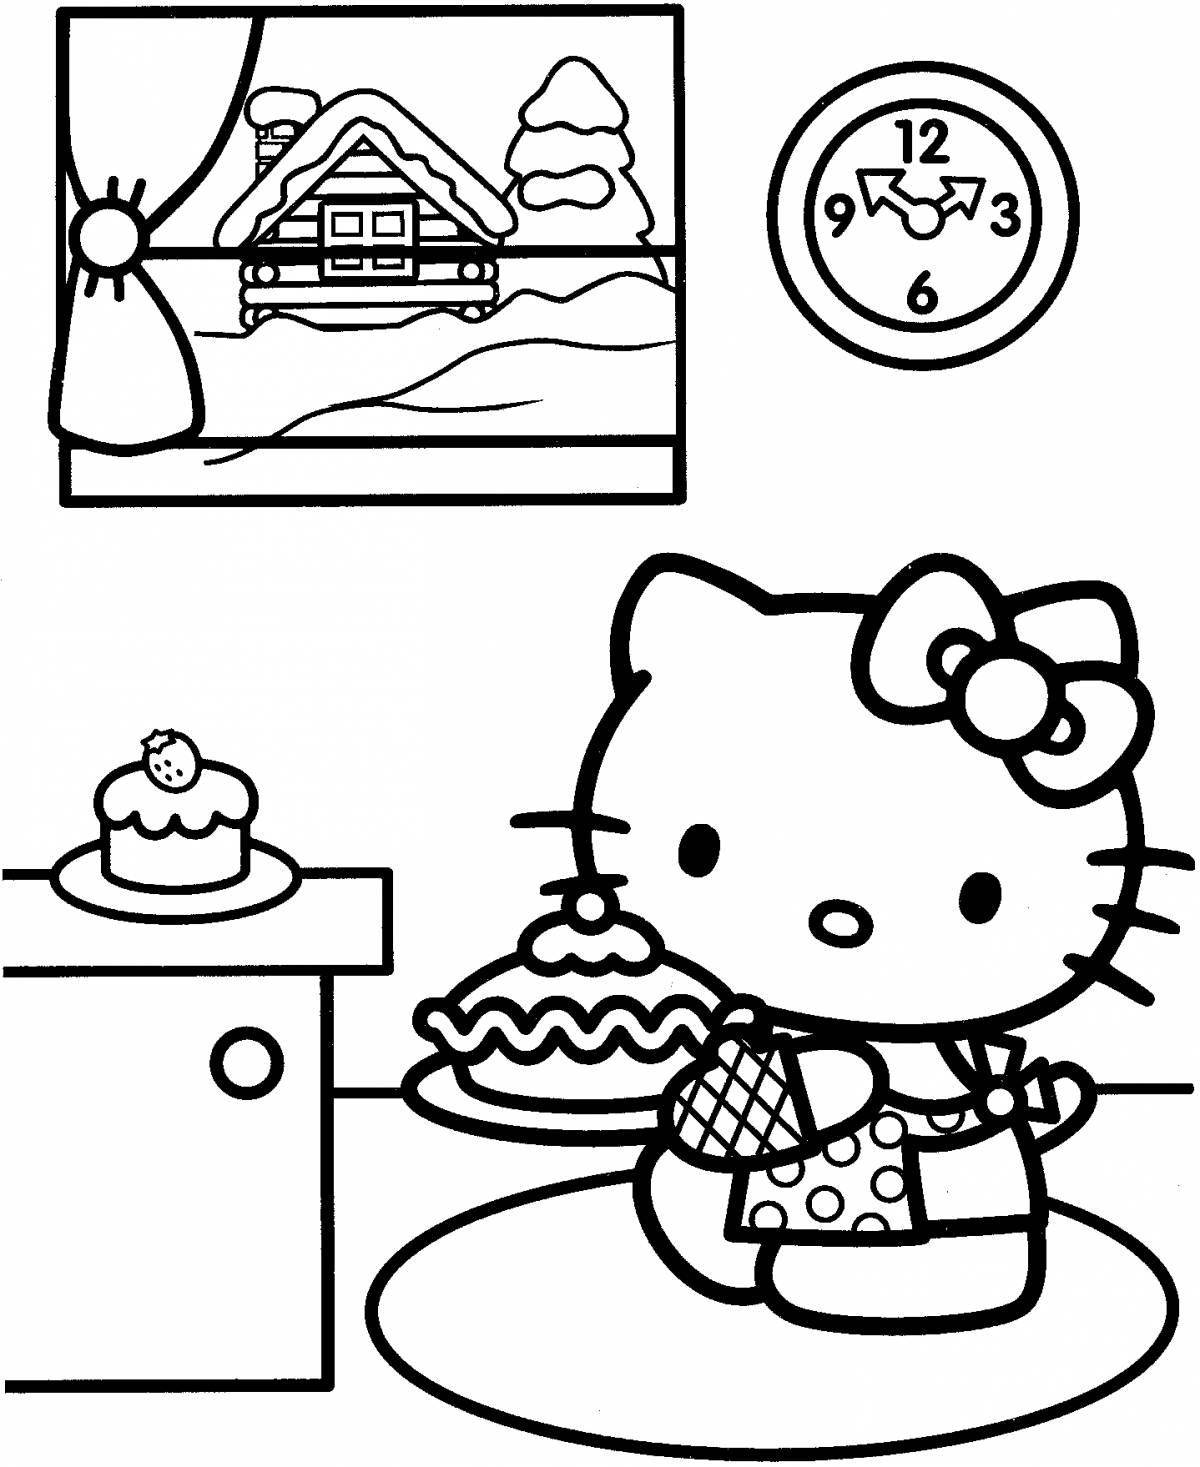 Playful hello kitty face coloring page